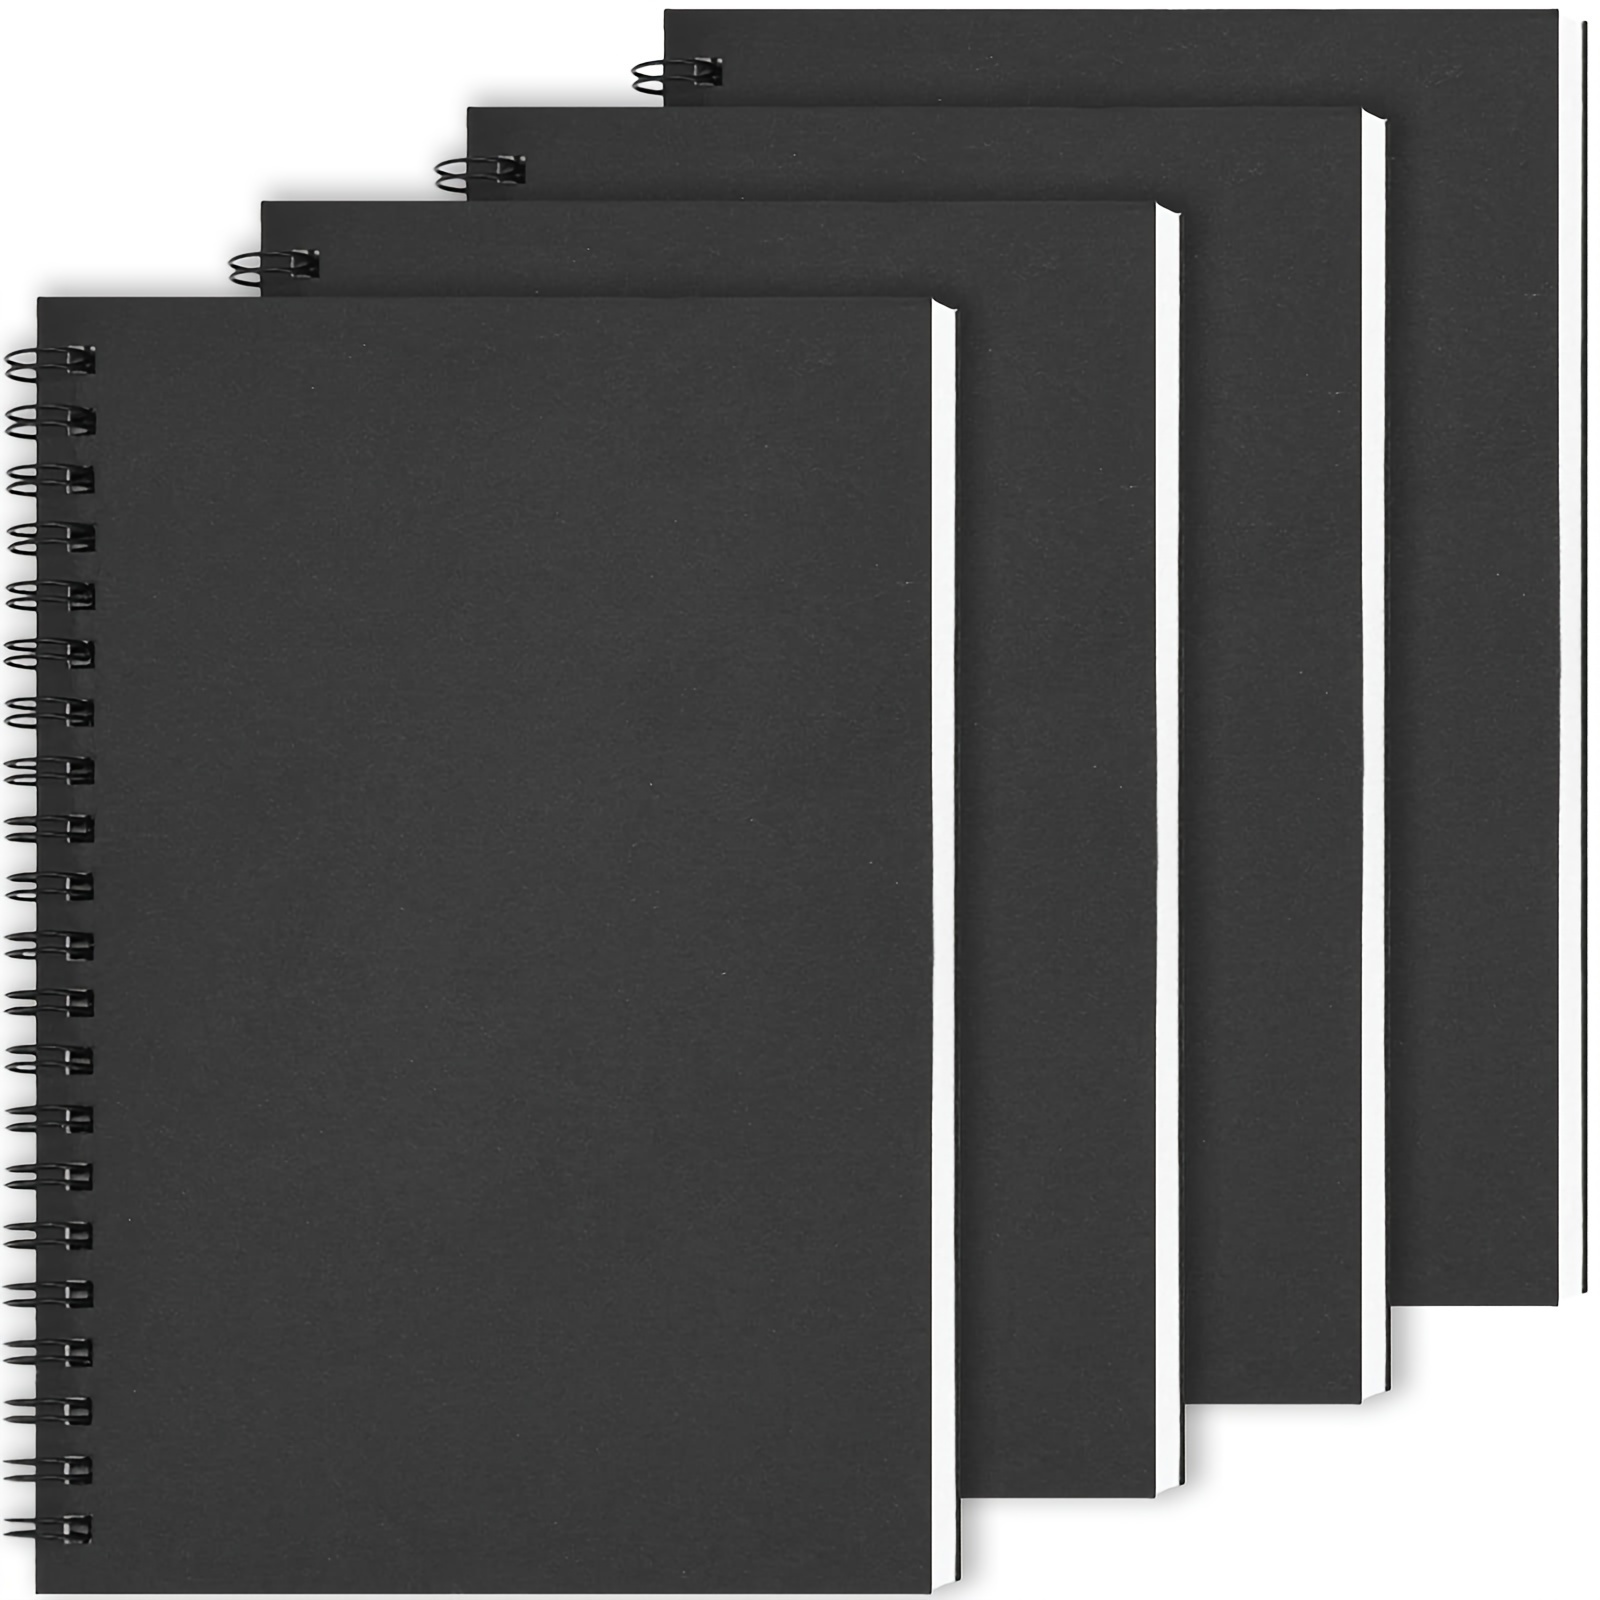 Spiral Sketch Book Large Notebook Kraft Cover Blank Sketch Pad Wirebound Sketching for Drawing Painting 8.5x11-inch (2 Pack) 200 Sheets, 100 Sheets, 2